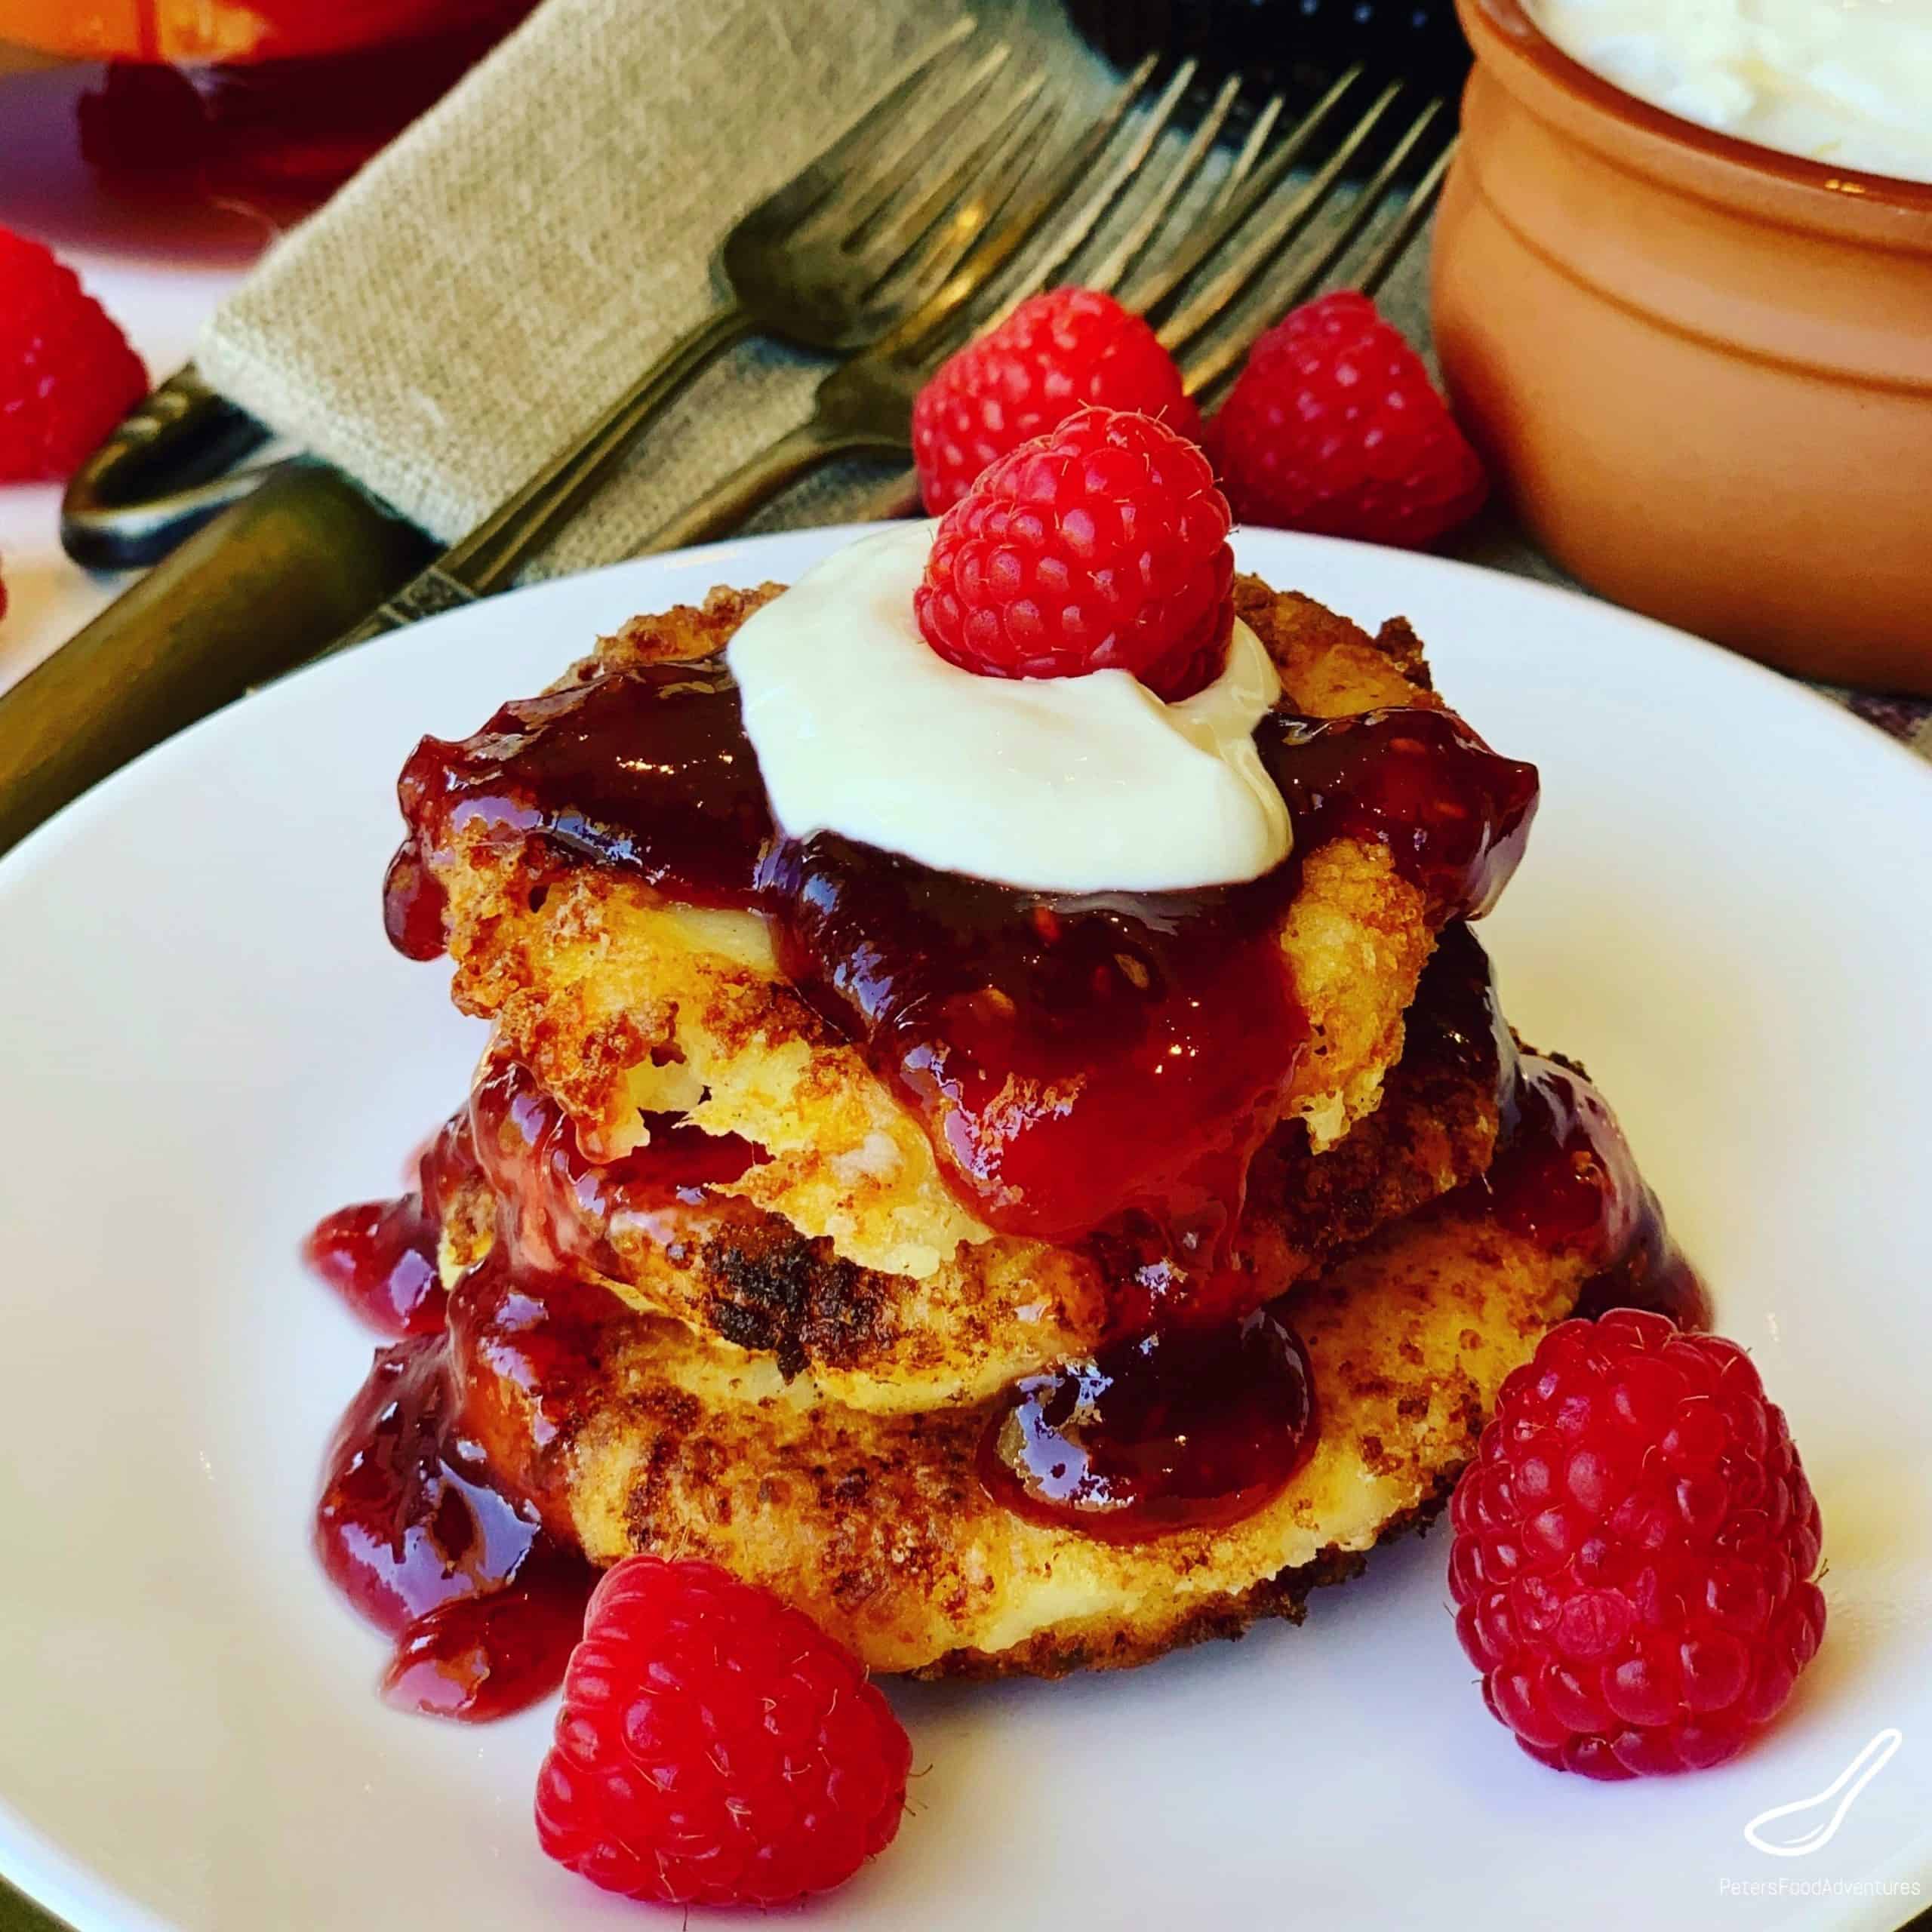 Babushka's Russian Syrniki, rustic, creamy and delicious. Made from Tvorog, Quark, or Farmers Cheese is a delicious Cheese Pancake. Crispy on the outside, creamy on the inside, topped with sour cream and jam. One of my favorite breakfast recipes.